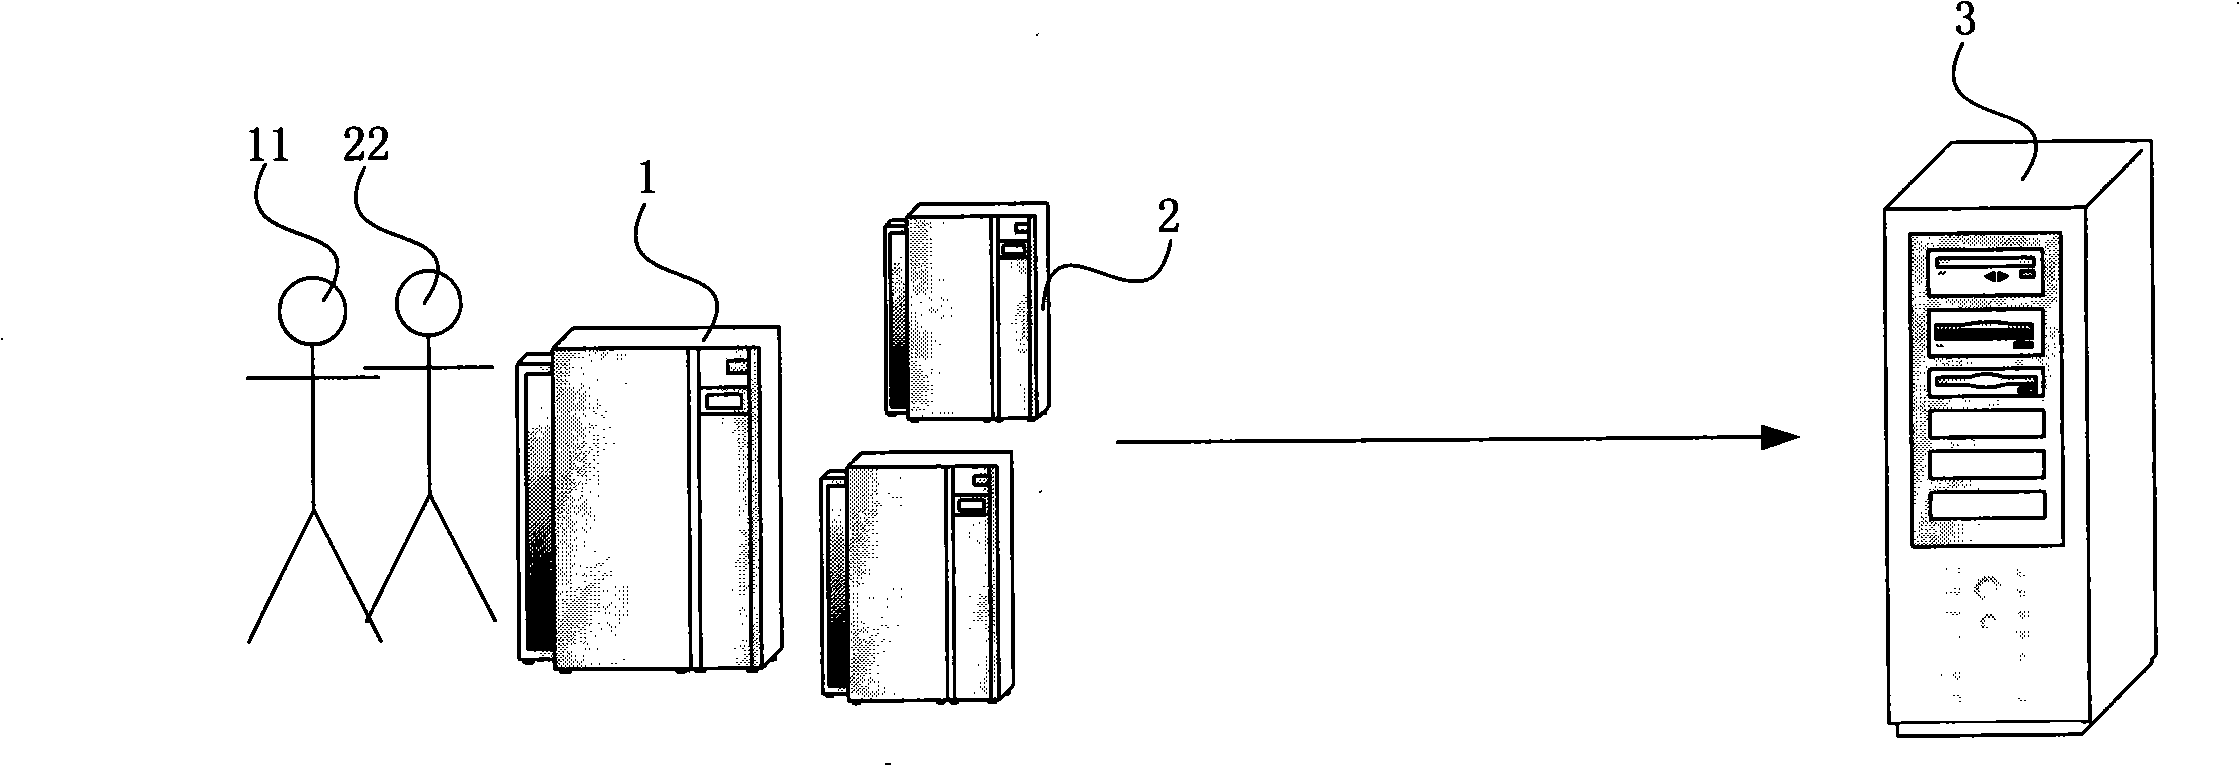 Compiling system and method